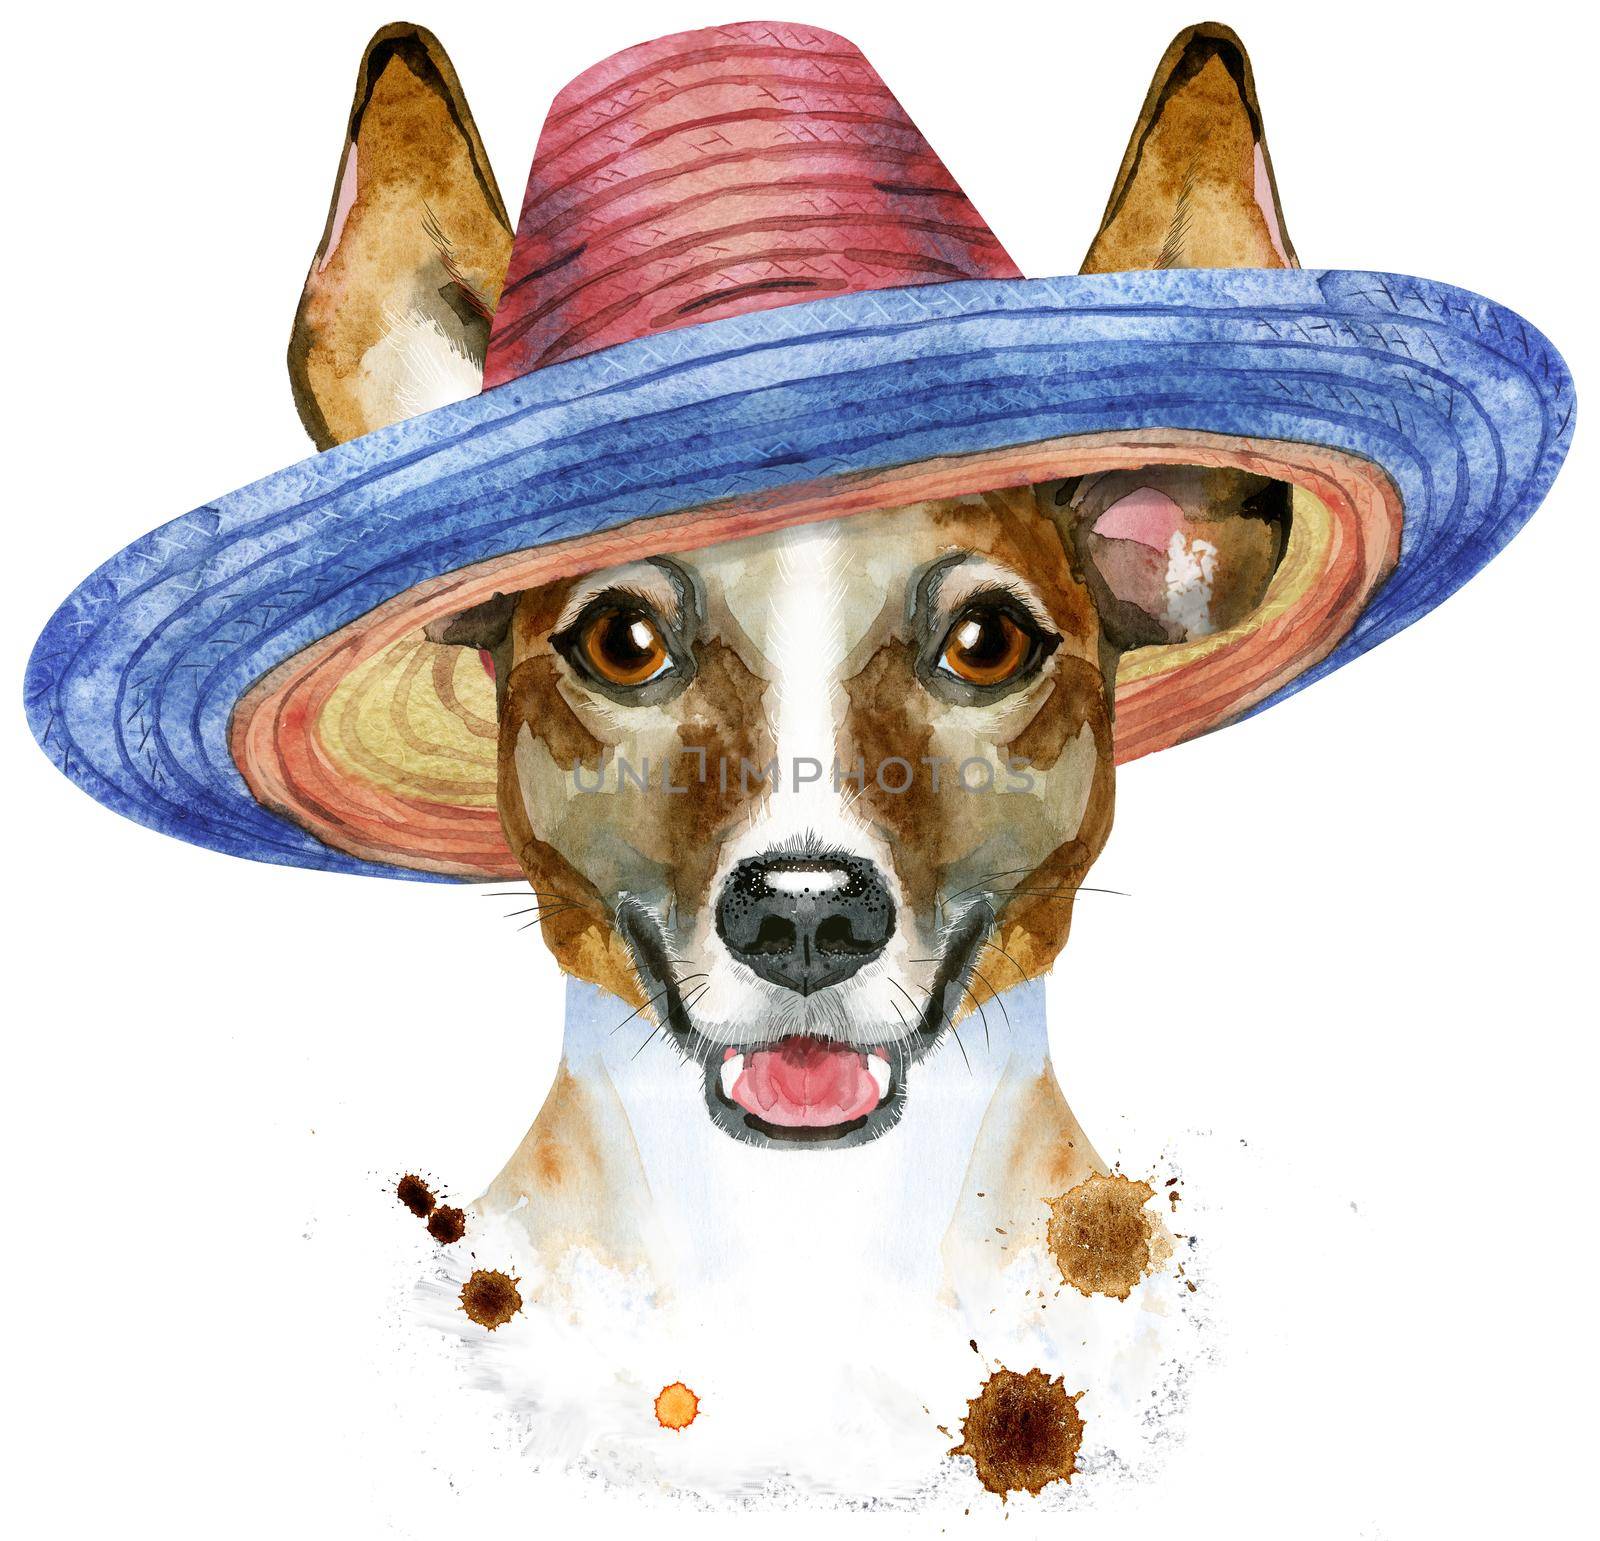 Cute Dog in mexican hat. Dog T-shirt graphics. watercolor jack russell terrier illustration